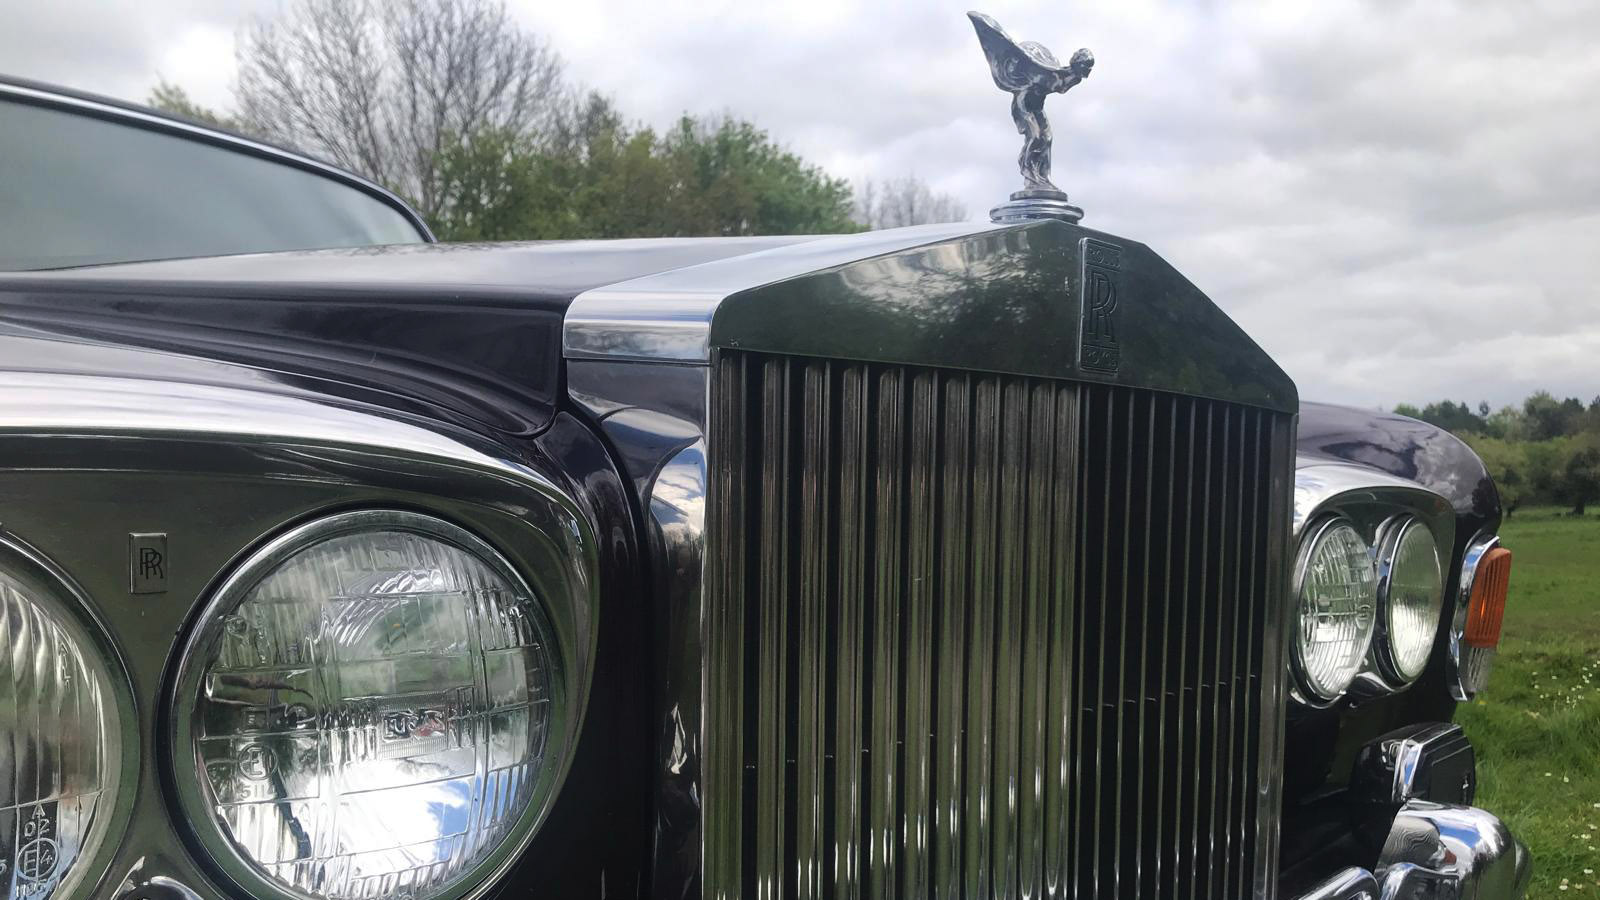 Close up on the Rolls-Royce Grill and Spirit of Ecstasy